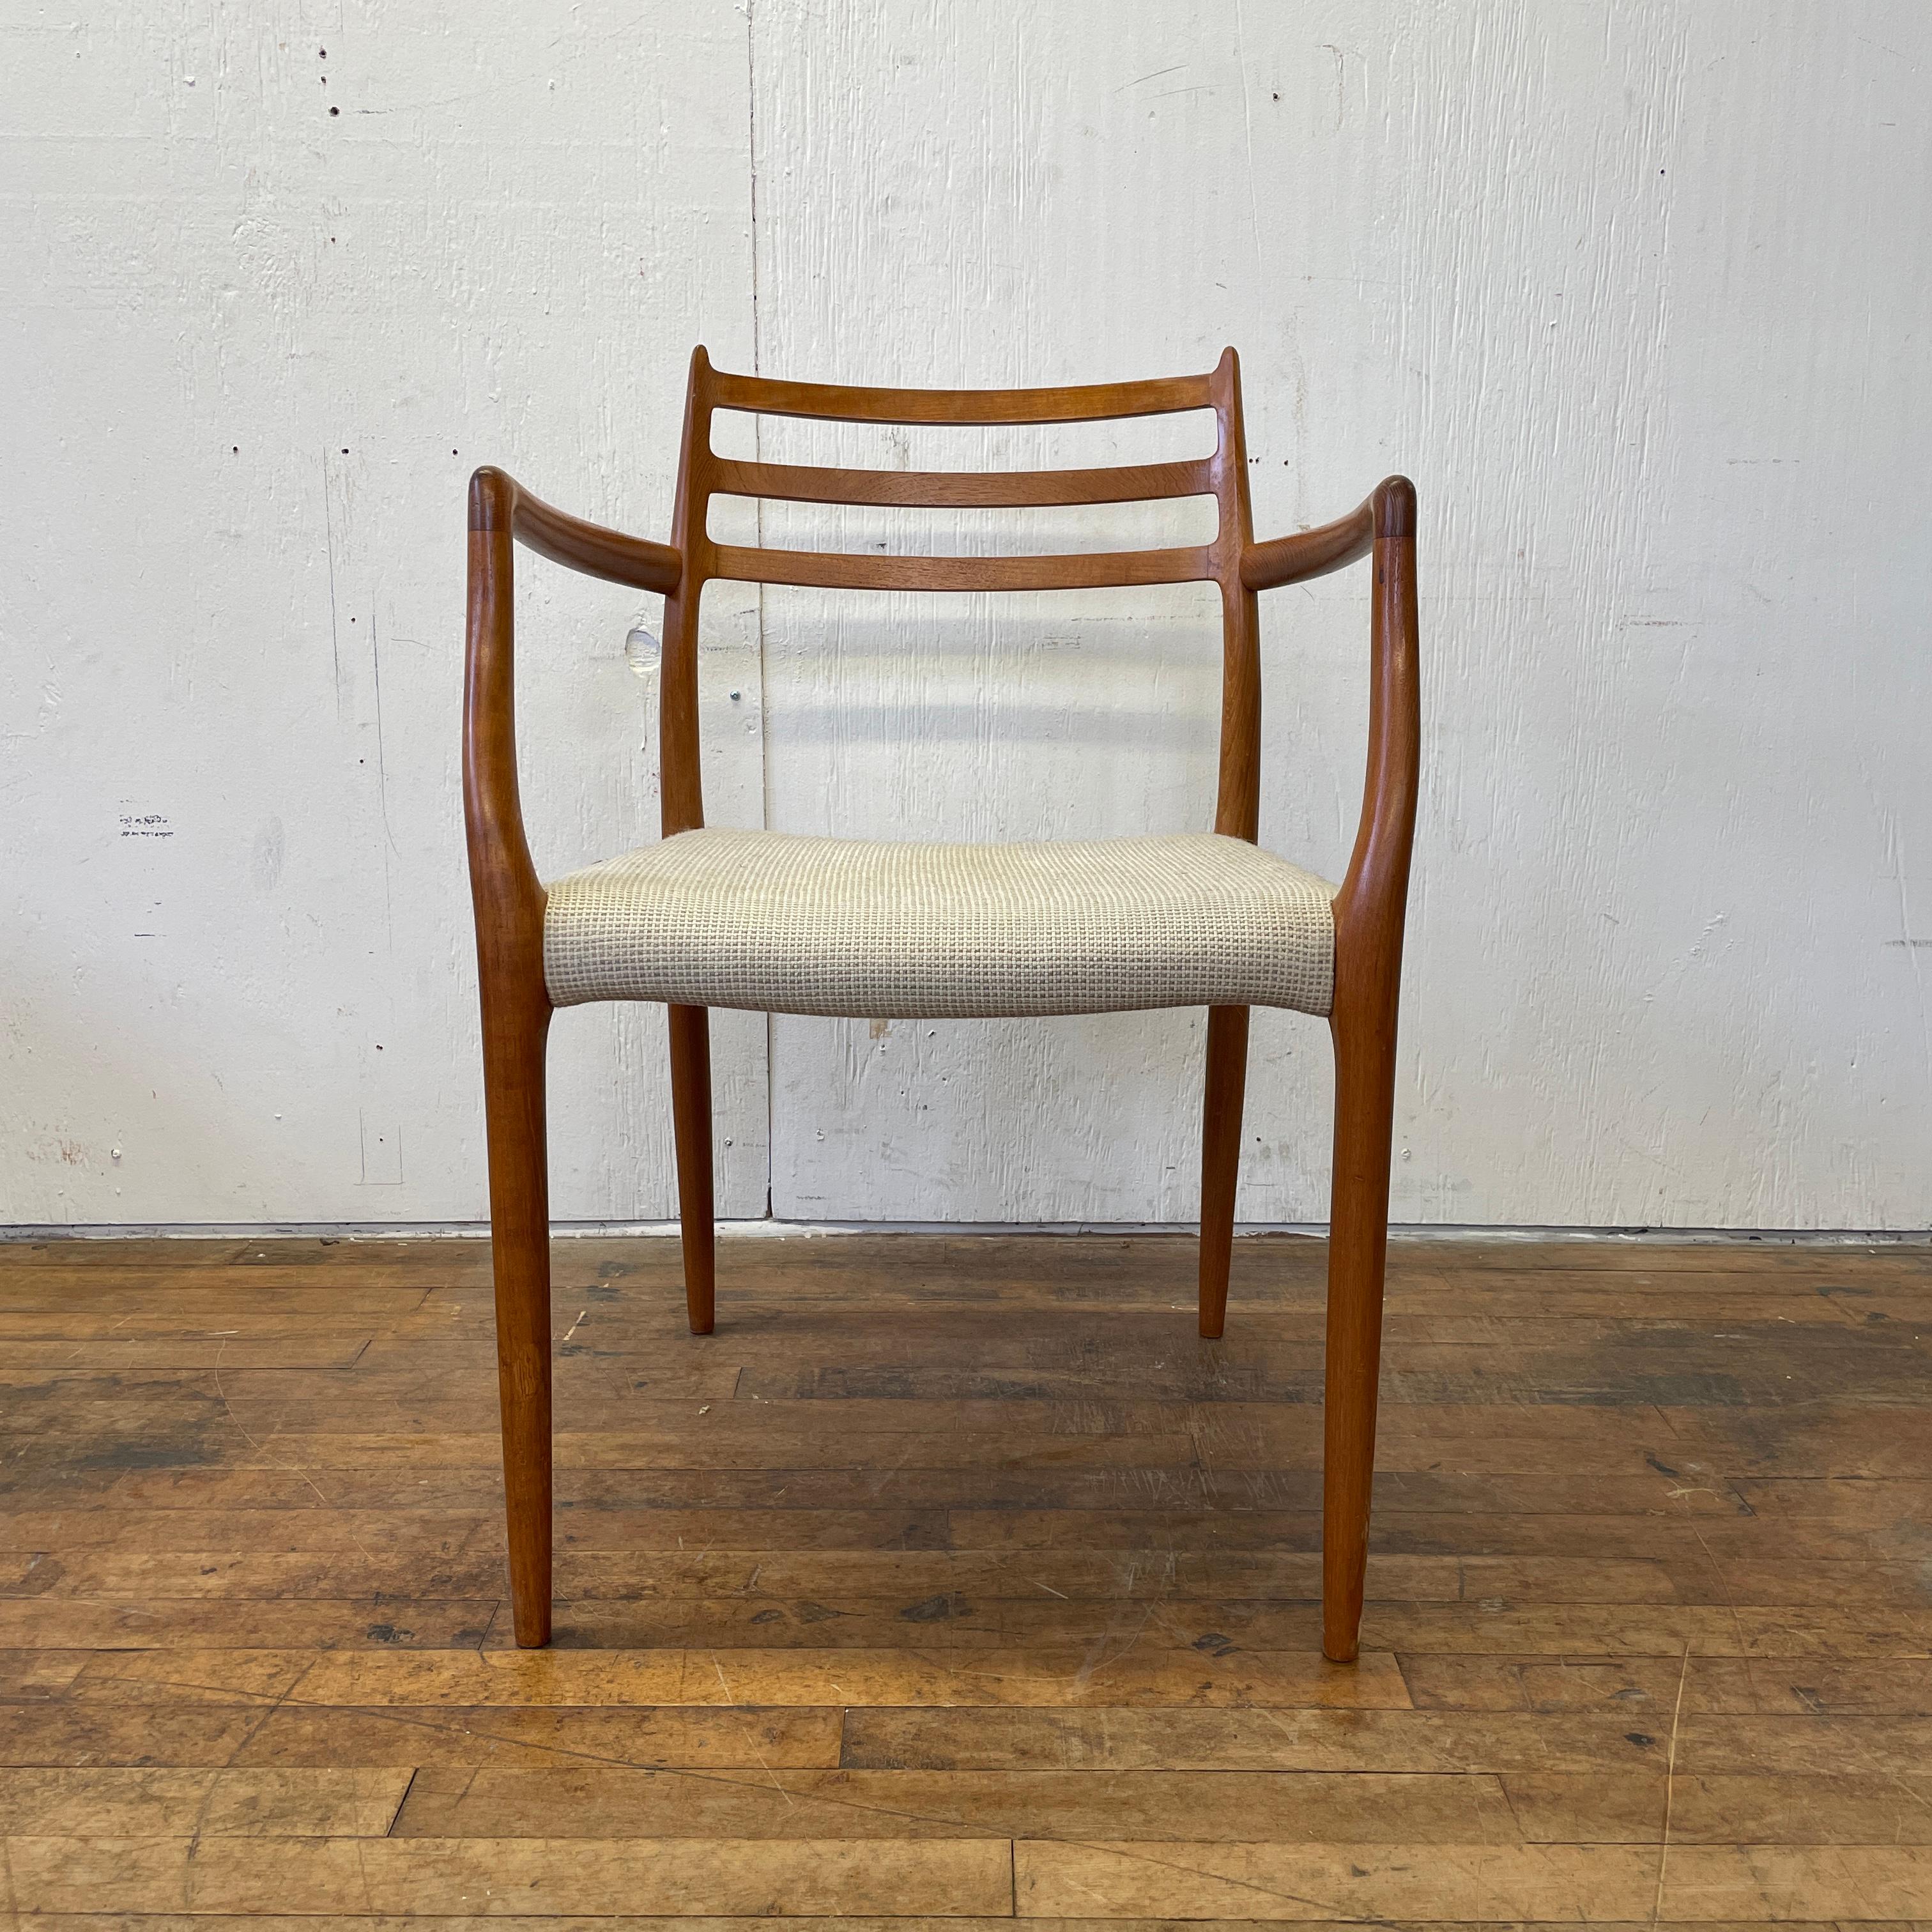 Among the most stylish and iconic chairs that money can buy, this Model #62 Scandinavian armchair by Niels Otto Moller is a midcentury Danish modern Classic. With a soft upholstered seat and a sinuous teak wood frame, this chair will add comfort and